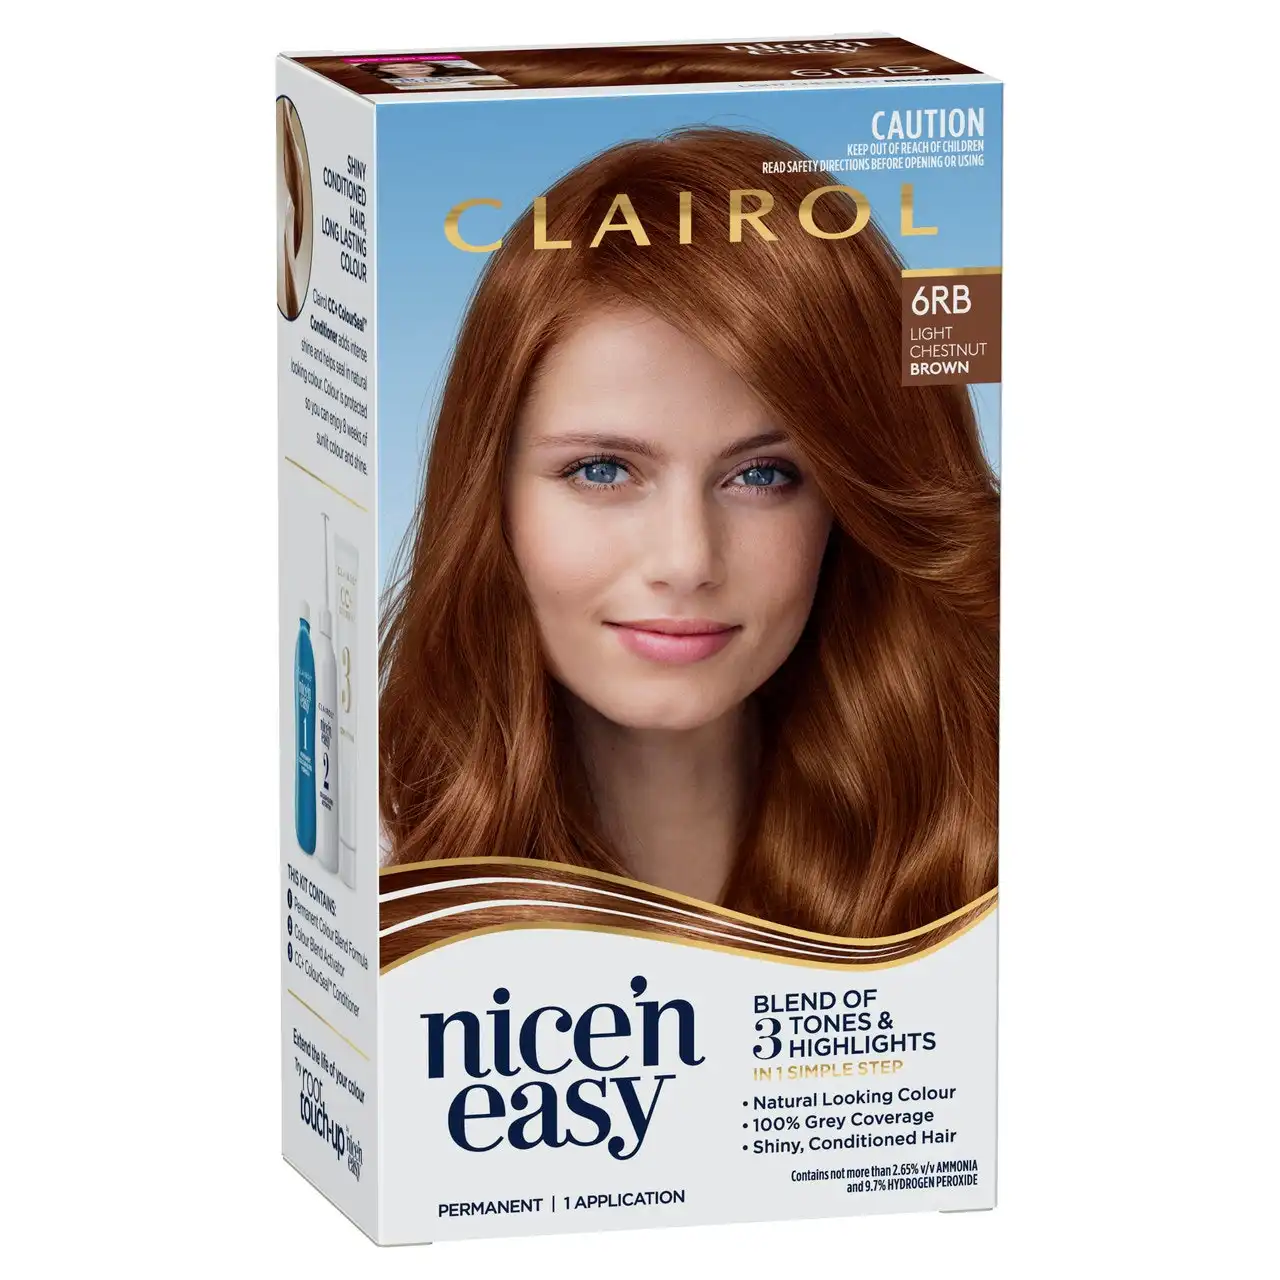 Clairol Nice 'N Easy 6RB Natural Light Chestnut Brown Permanent Hair Colour